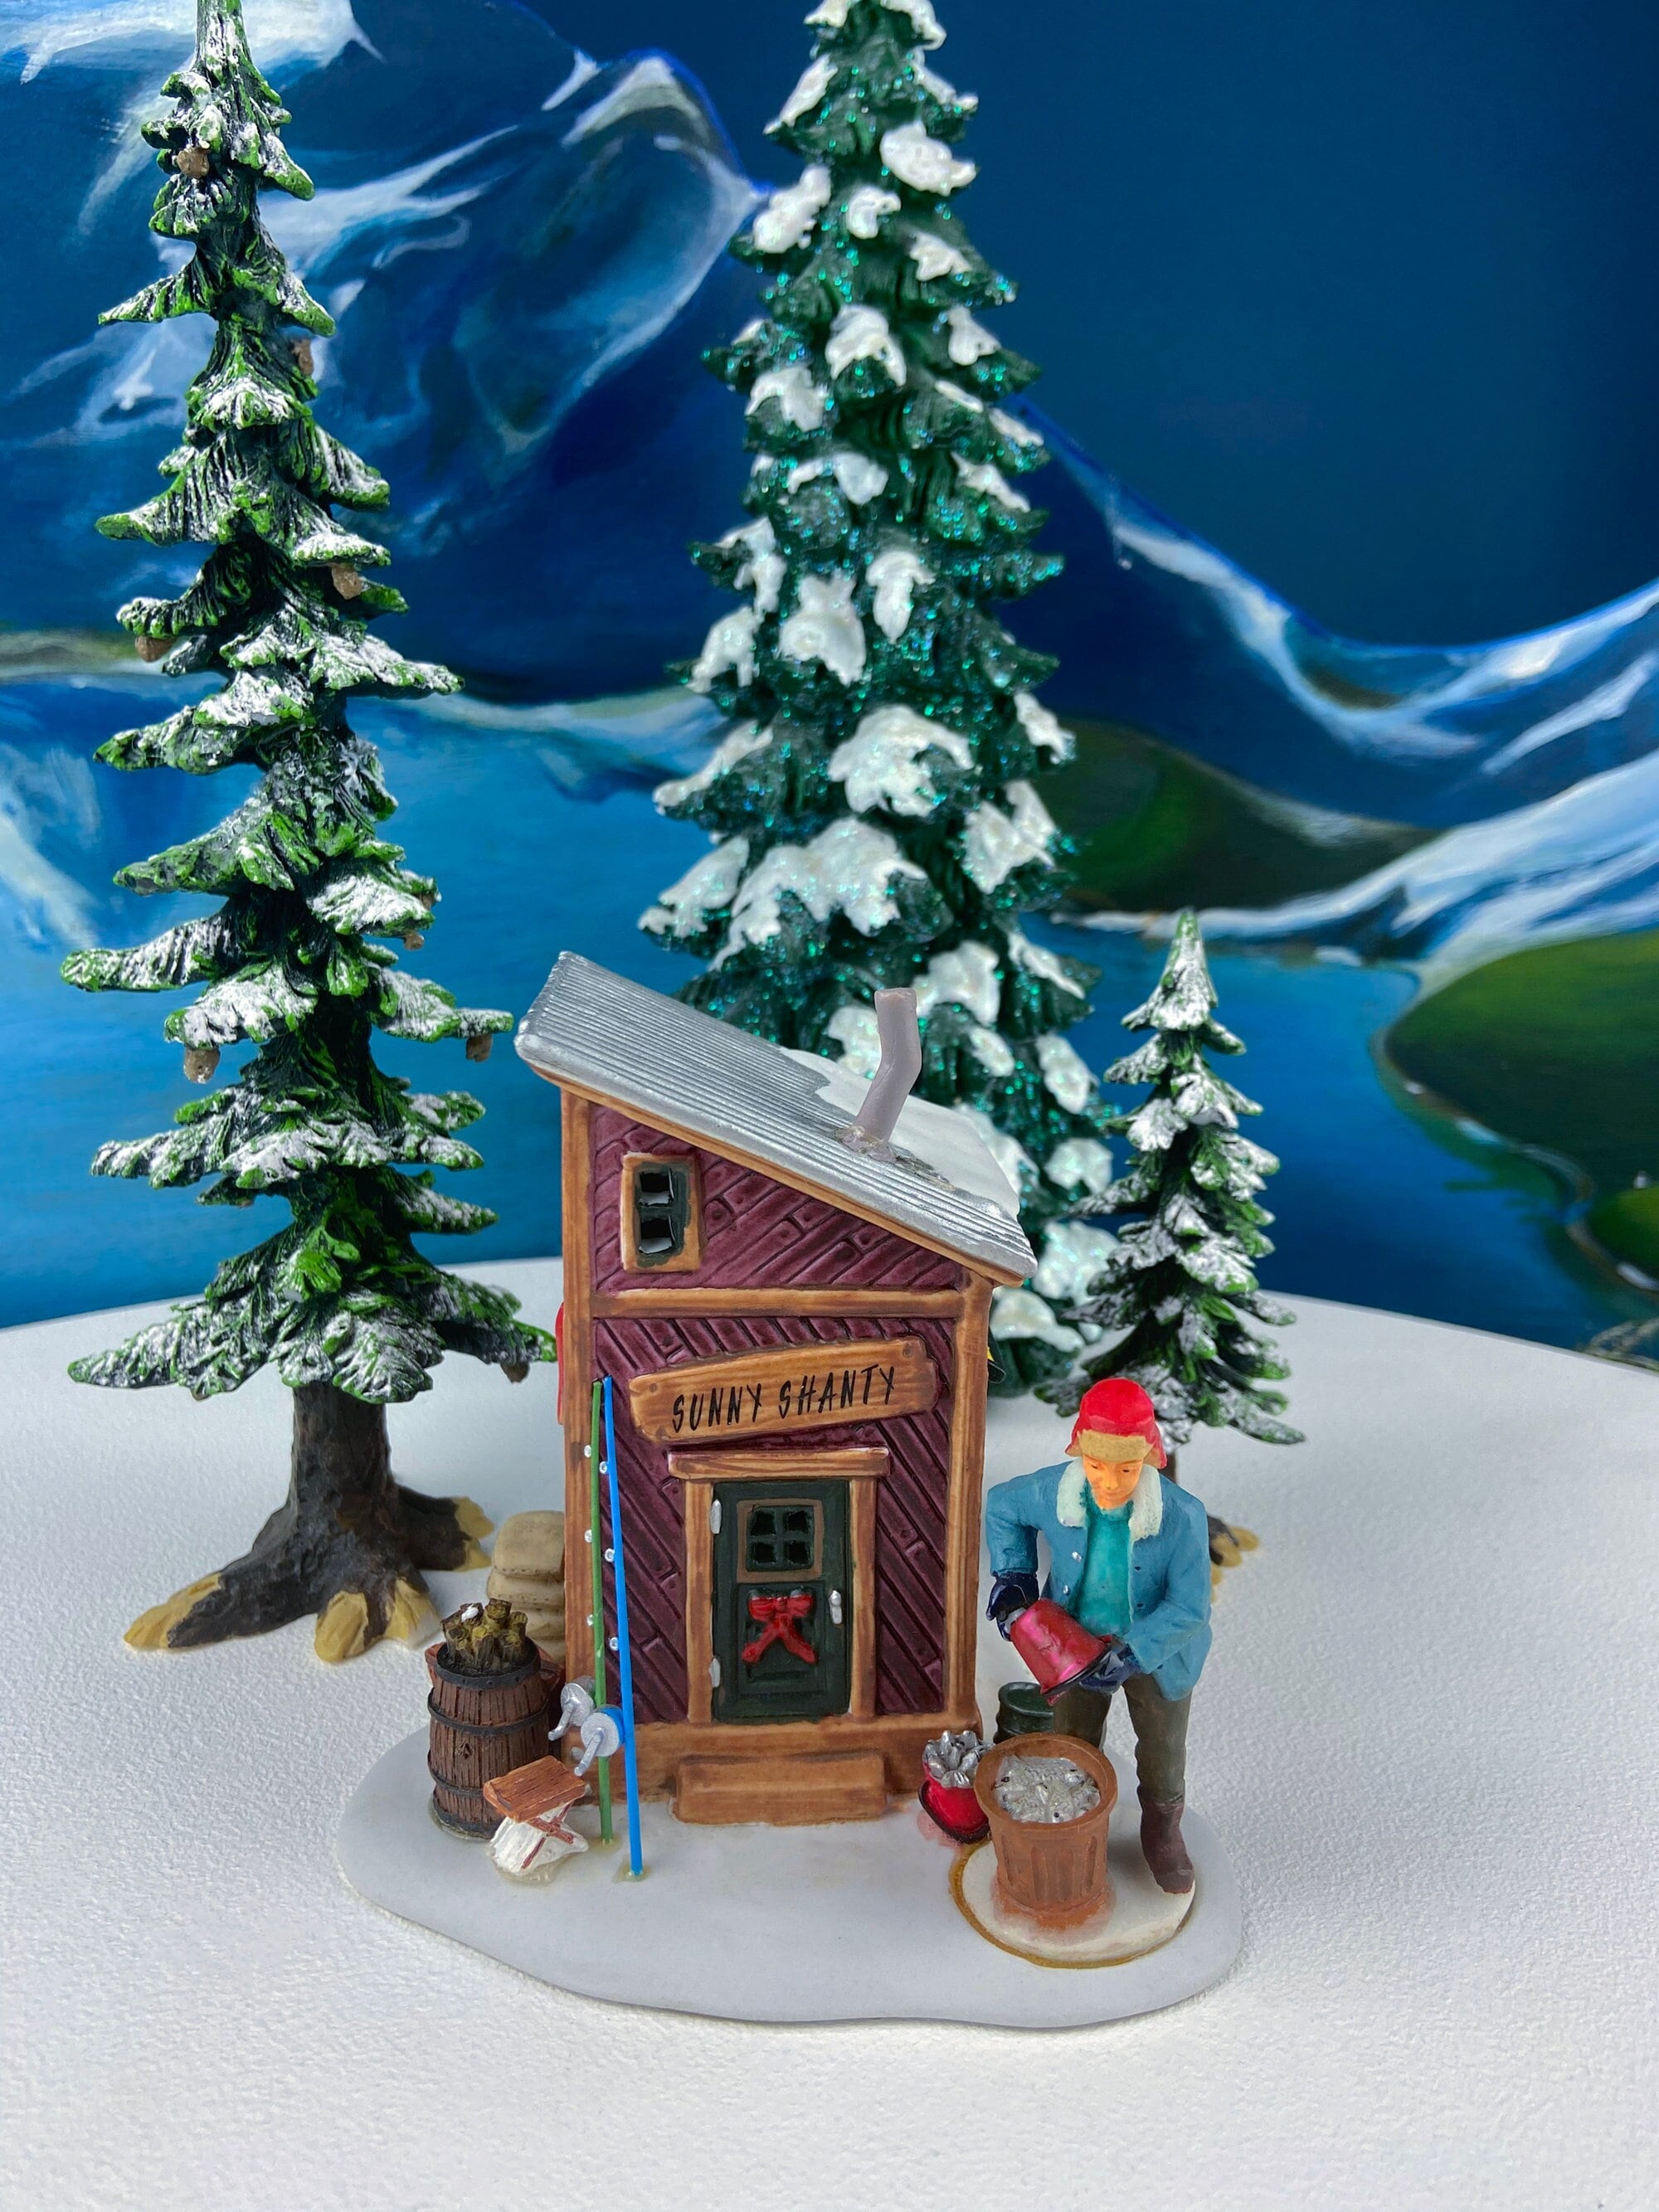 Sunny Shanty Christmas Village Figurine by Lemax. Illuminated Fishing  Scene. Enchanted Forest Series. Holiday Decor. Gift for Fishing Dad. -   India